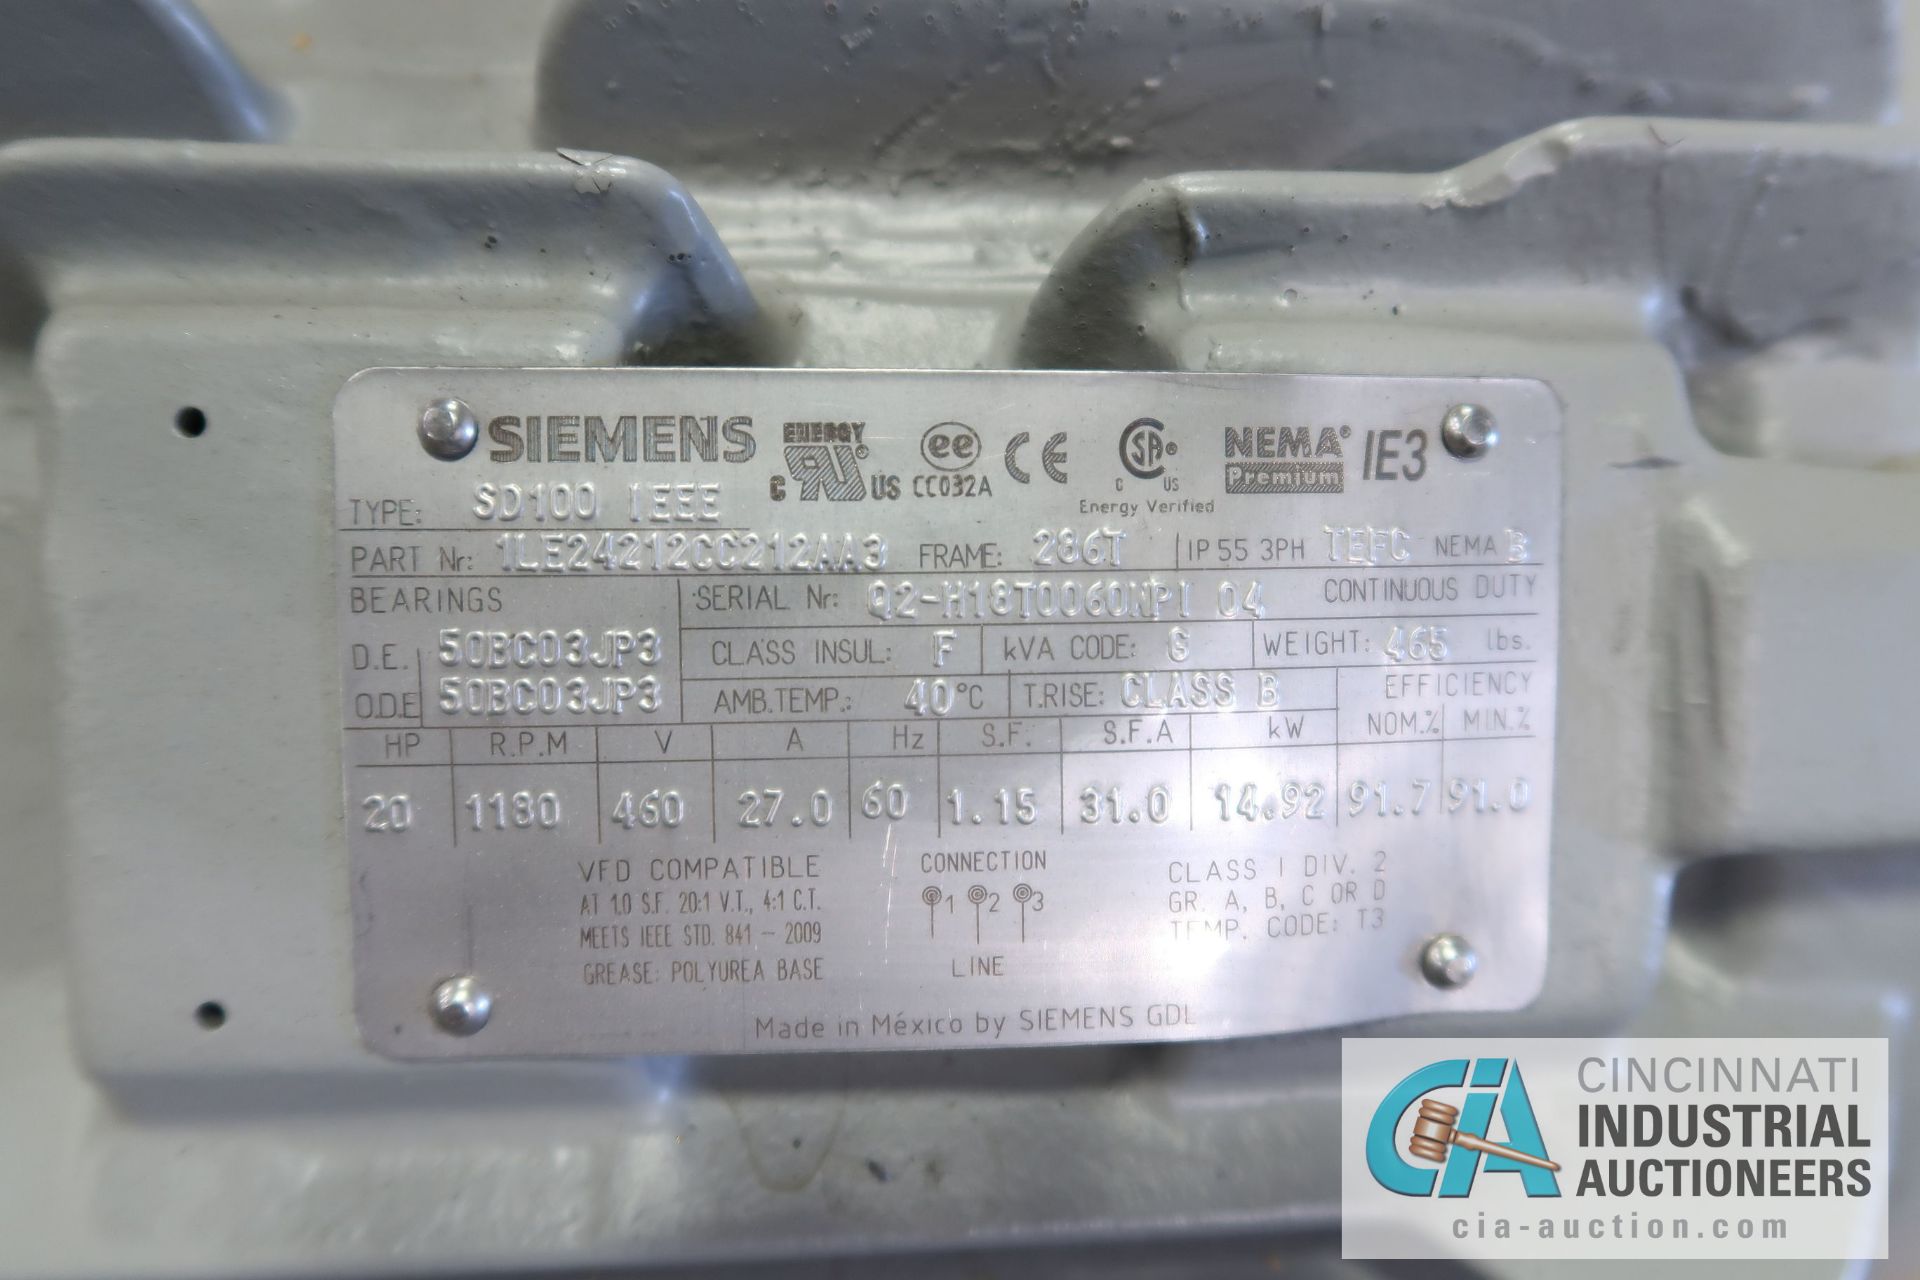 20 HP SIEMENS TYPE SD100-IEE FRAME 286T ELECTRIC MOTOR, 1,180 RPM - Image 3 of 3